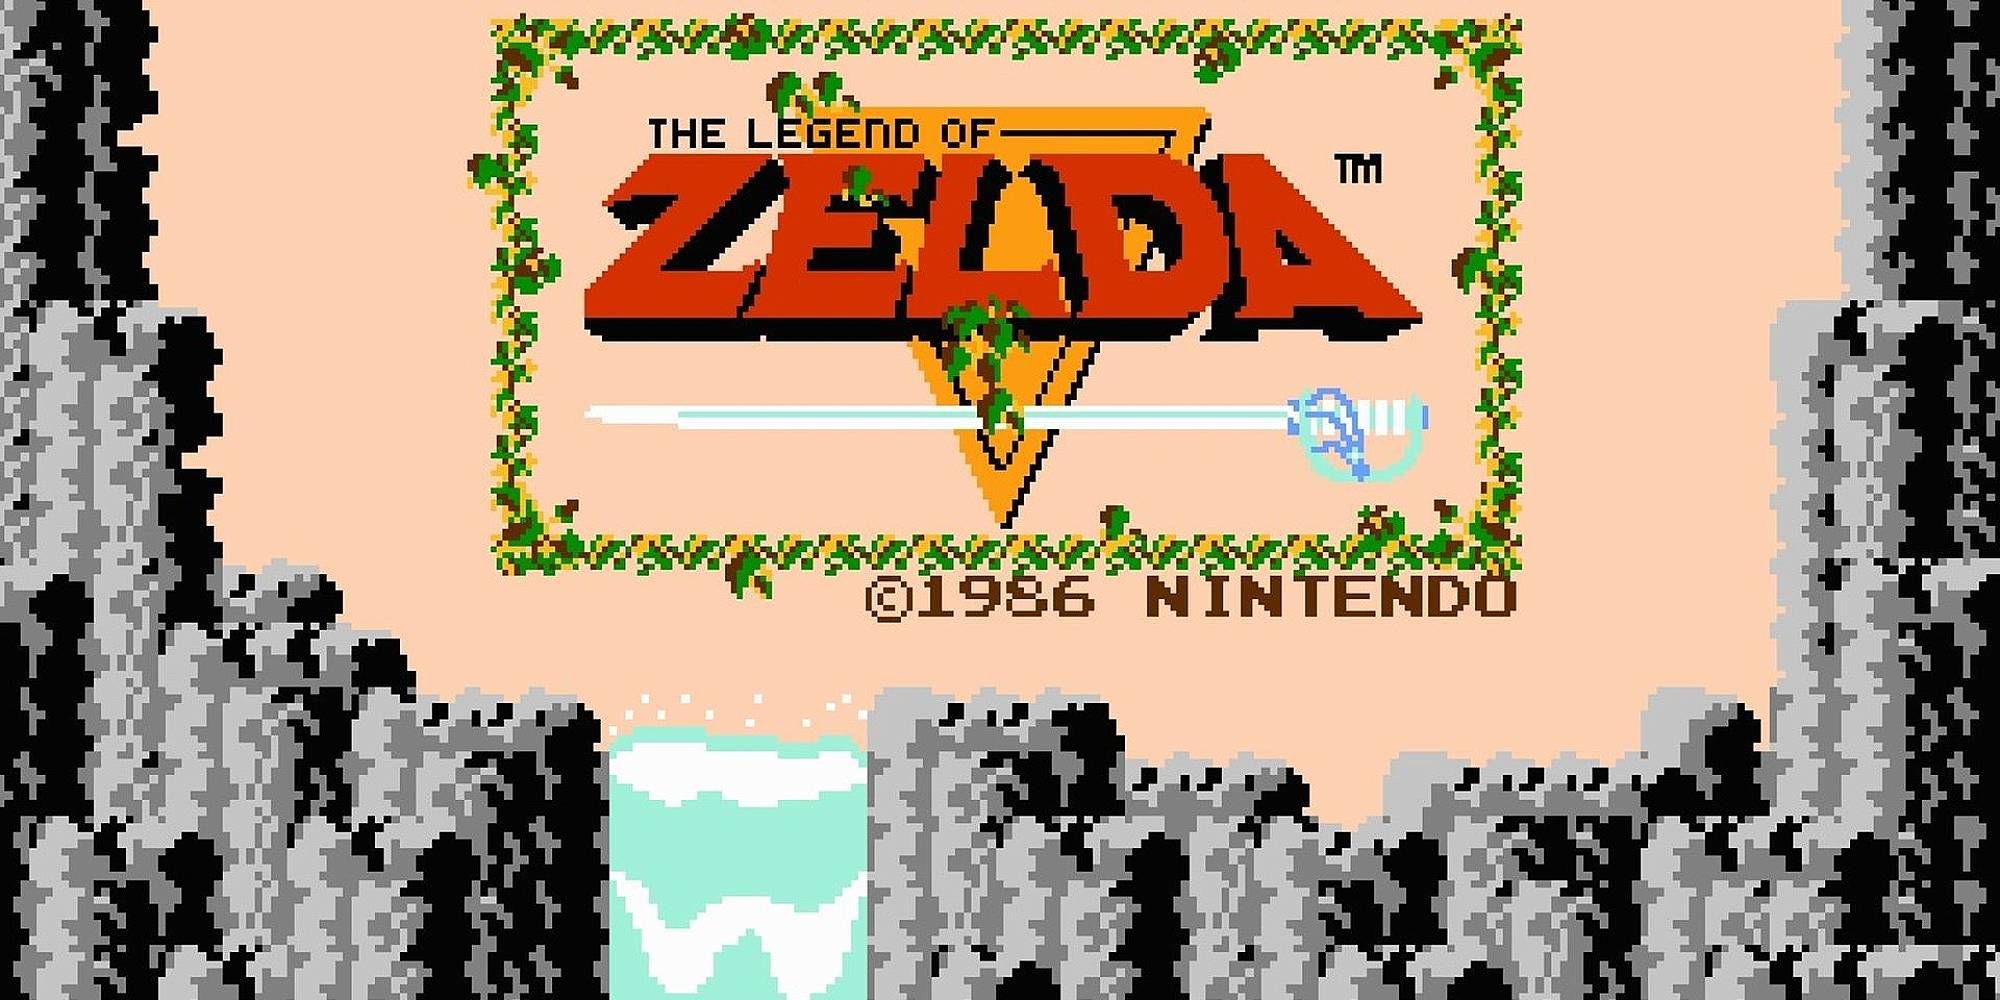 A screen showing The Legend of Zelda in bold font atop a pixelated waterfall